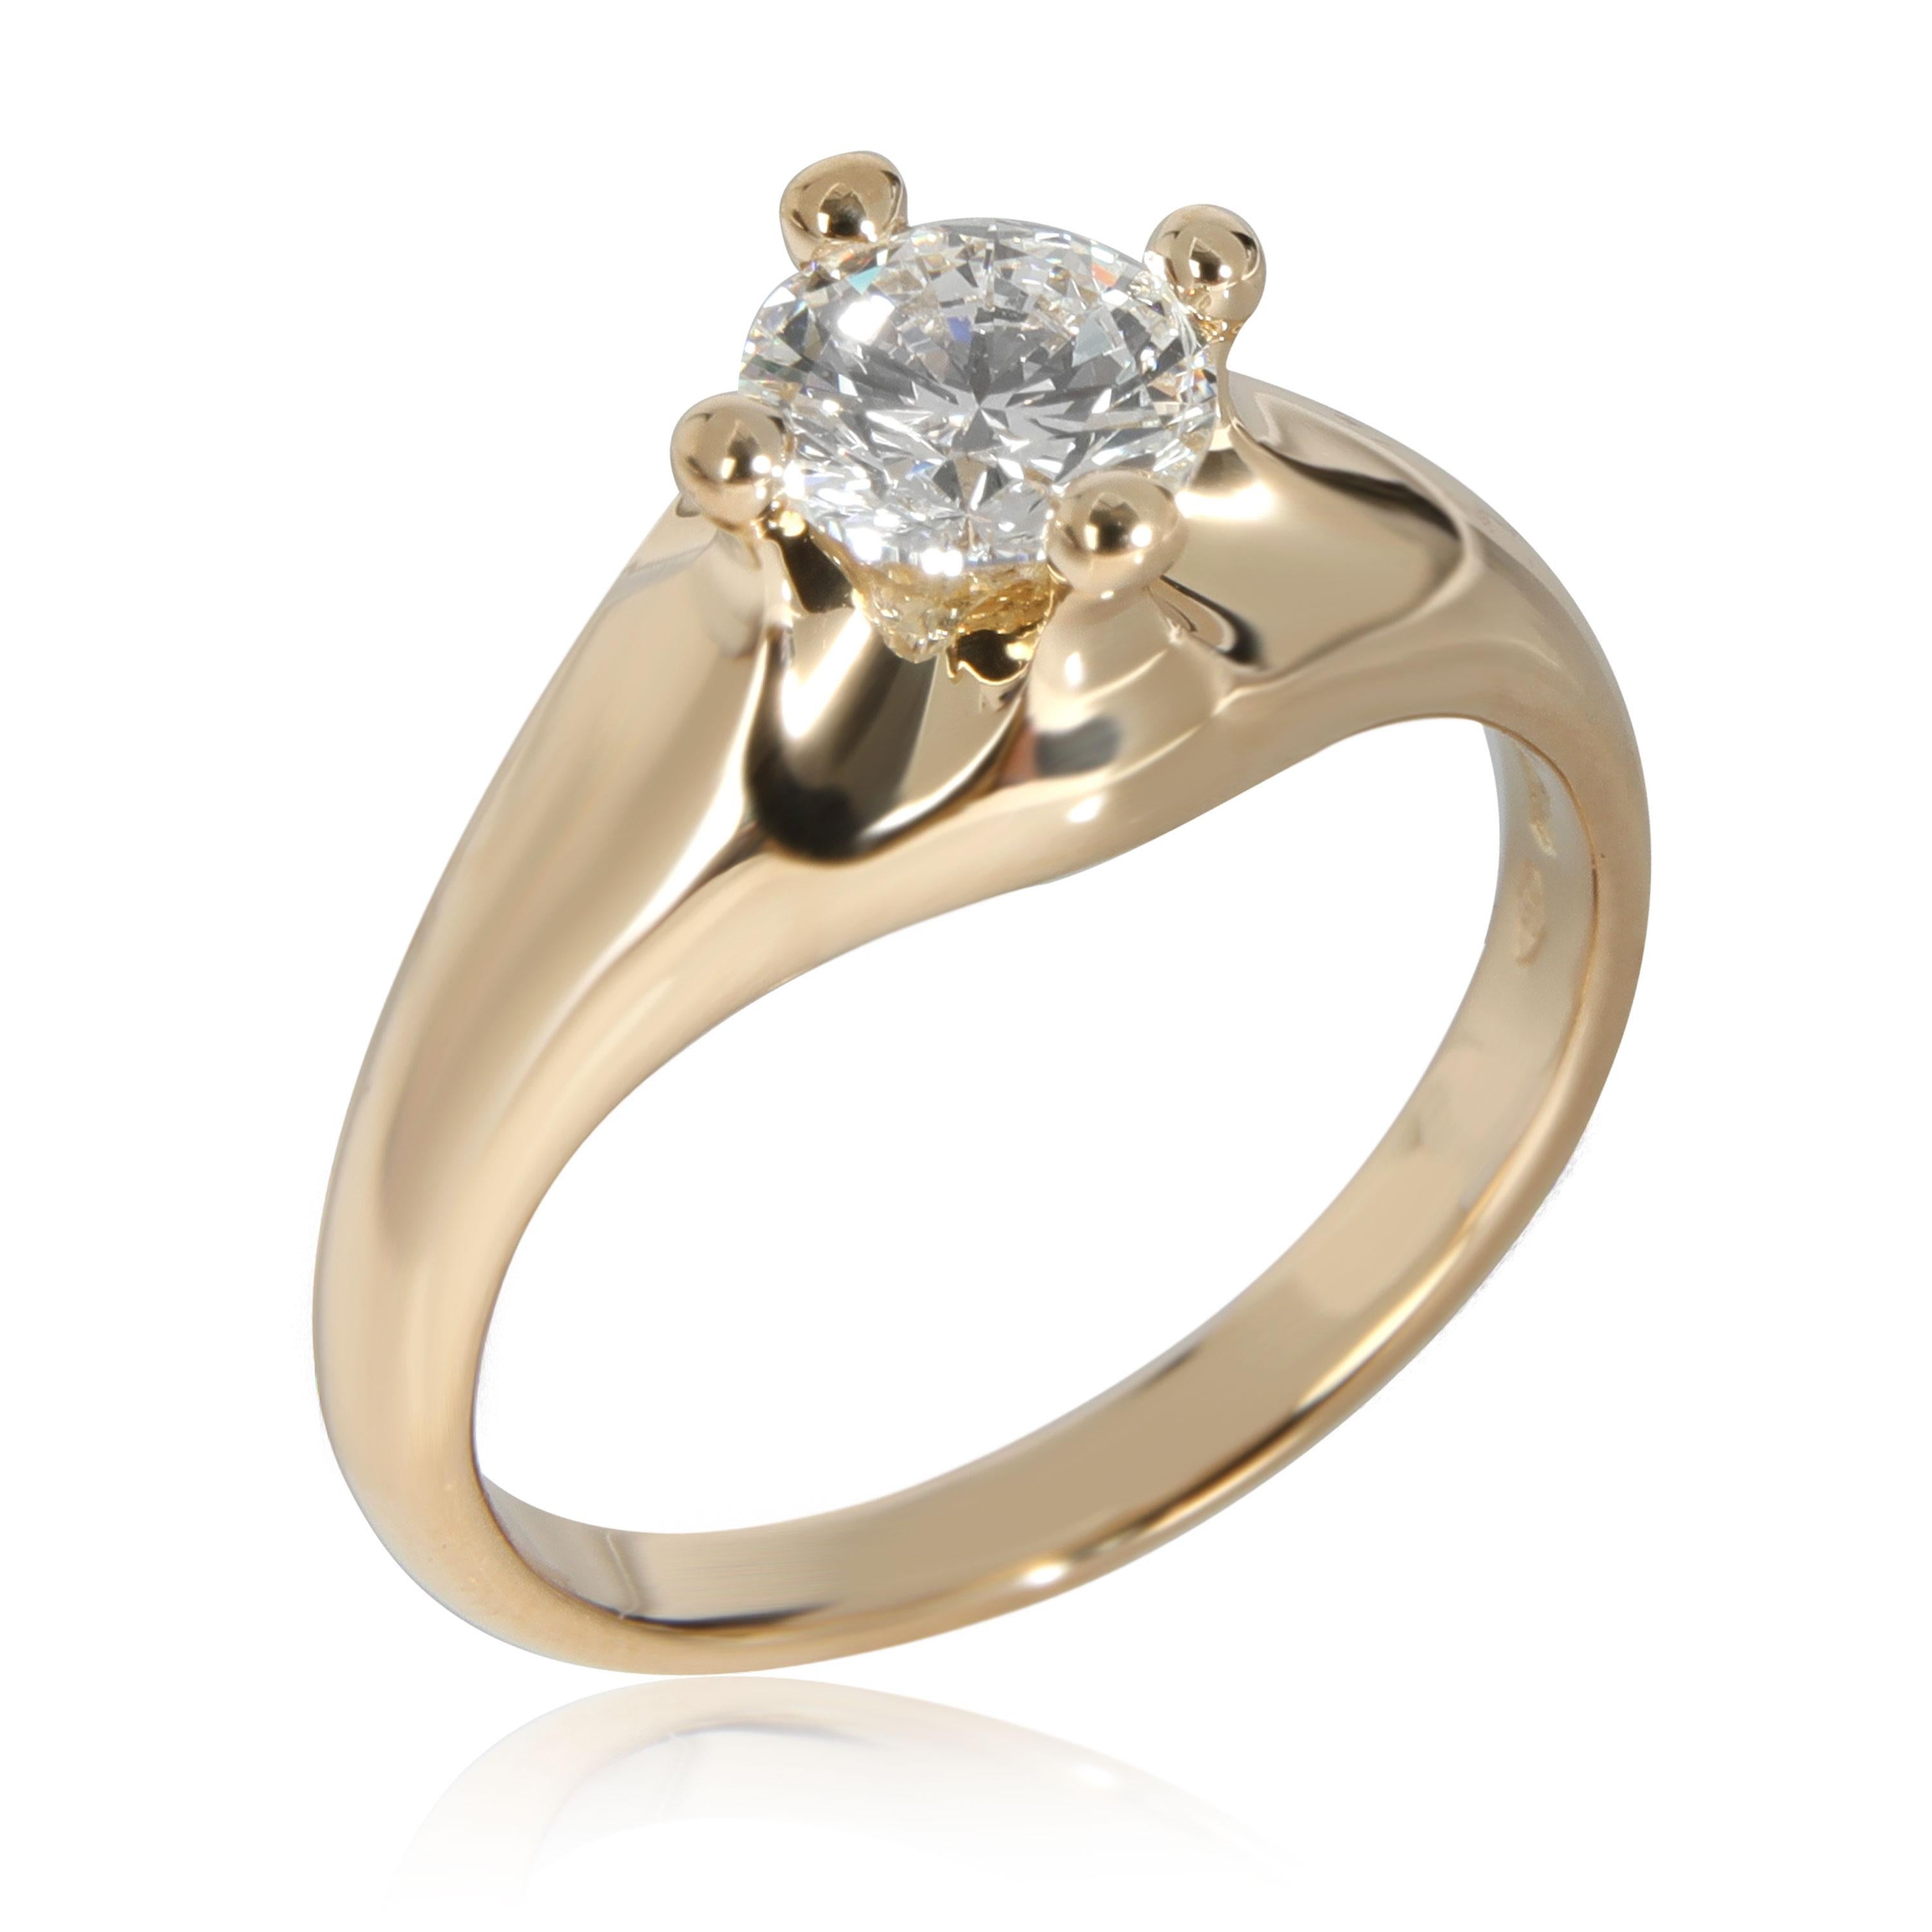 Bulgari Corona Diamond Solitaire Engagement Ring in 18K Gold G VS1 0.65 CTW

PRIMARY DETAILS
SKU: 112137
Listing Title: Bulgari Corona Diamond Solitaire Engagement Ring in 18K Gold G VS1 0.65 CTW
Condition Description: Retails for 7,500 USD. In